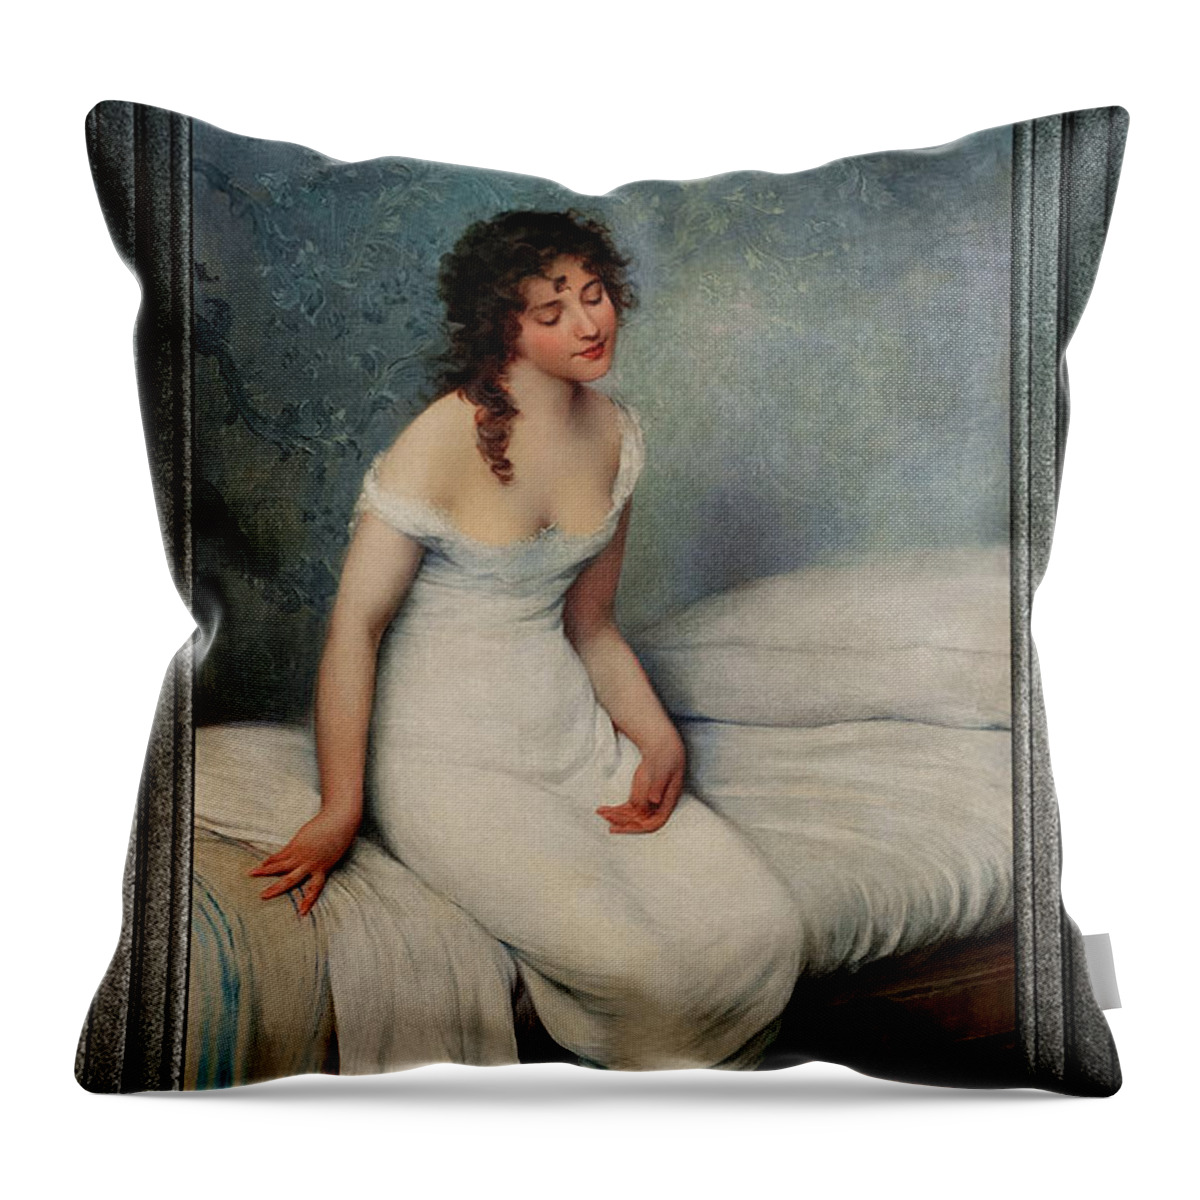 Awakening Throw Pillow featuring the painting Awakening by Eugene de Blaas Old Masters Reproduction by Rolando Burbon